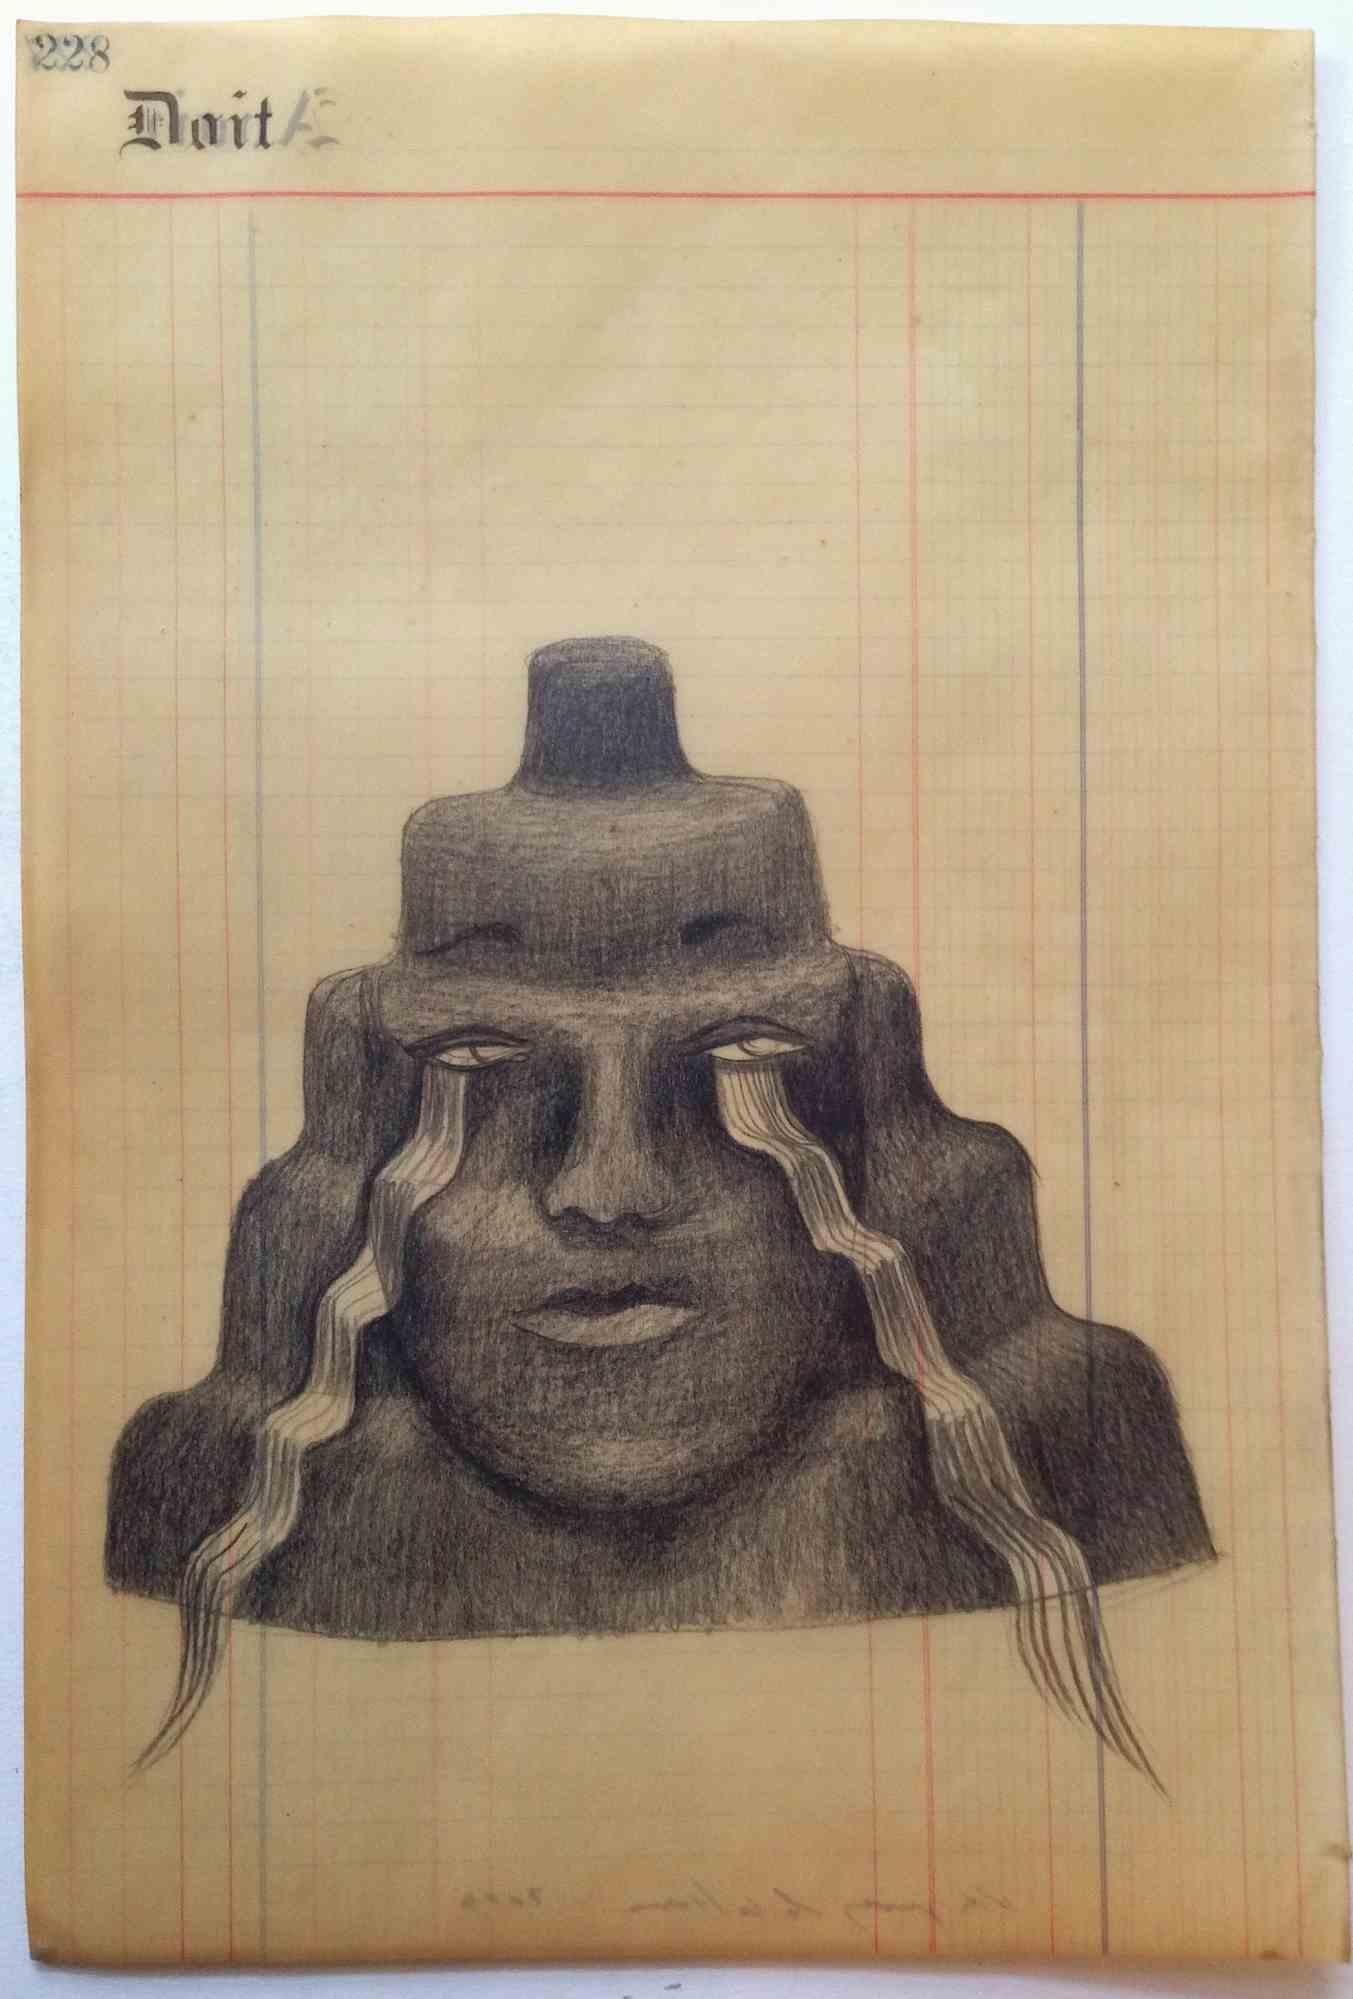 Llanto piramidal is a contemporary artwork realized by Sandra Vásquez de la Horra in 2013.

Pencil on waxed paper.

Hand signed on the back.

Sandra Vasquez De La Horra was born in Viña del Mar in Chile in 1967. She studied visual communication at